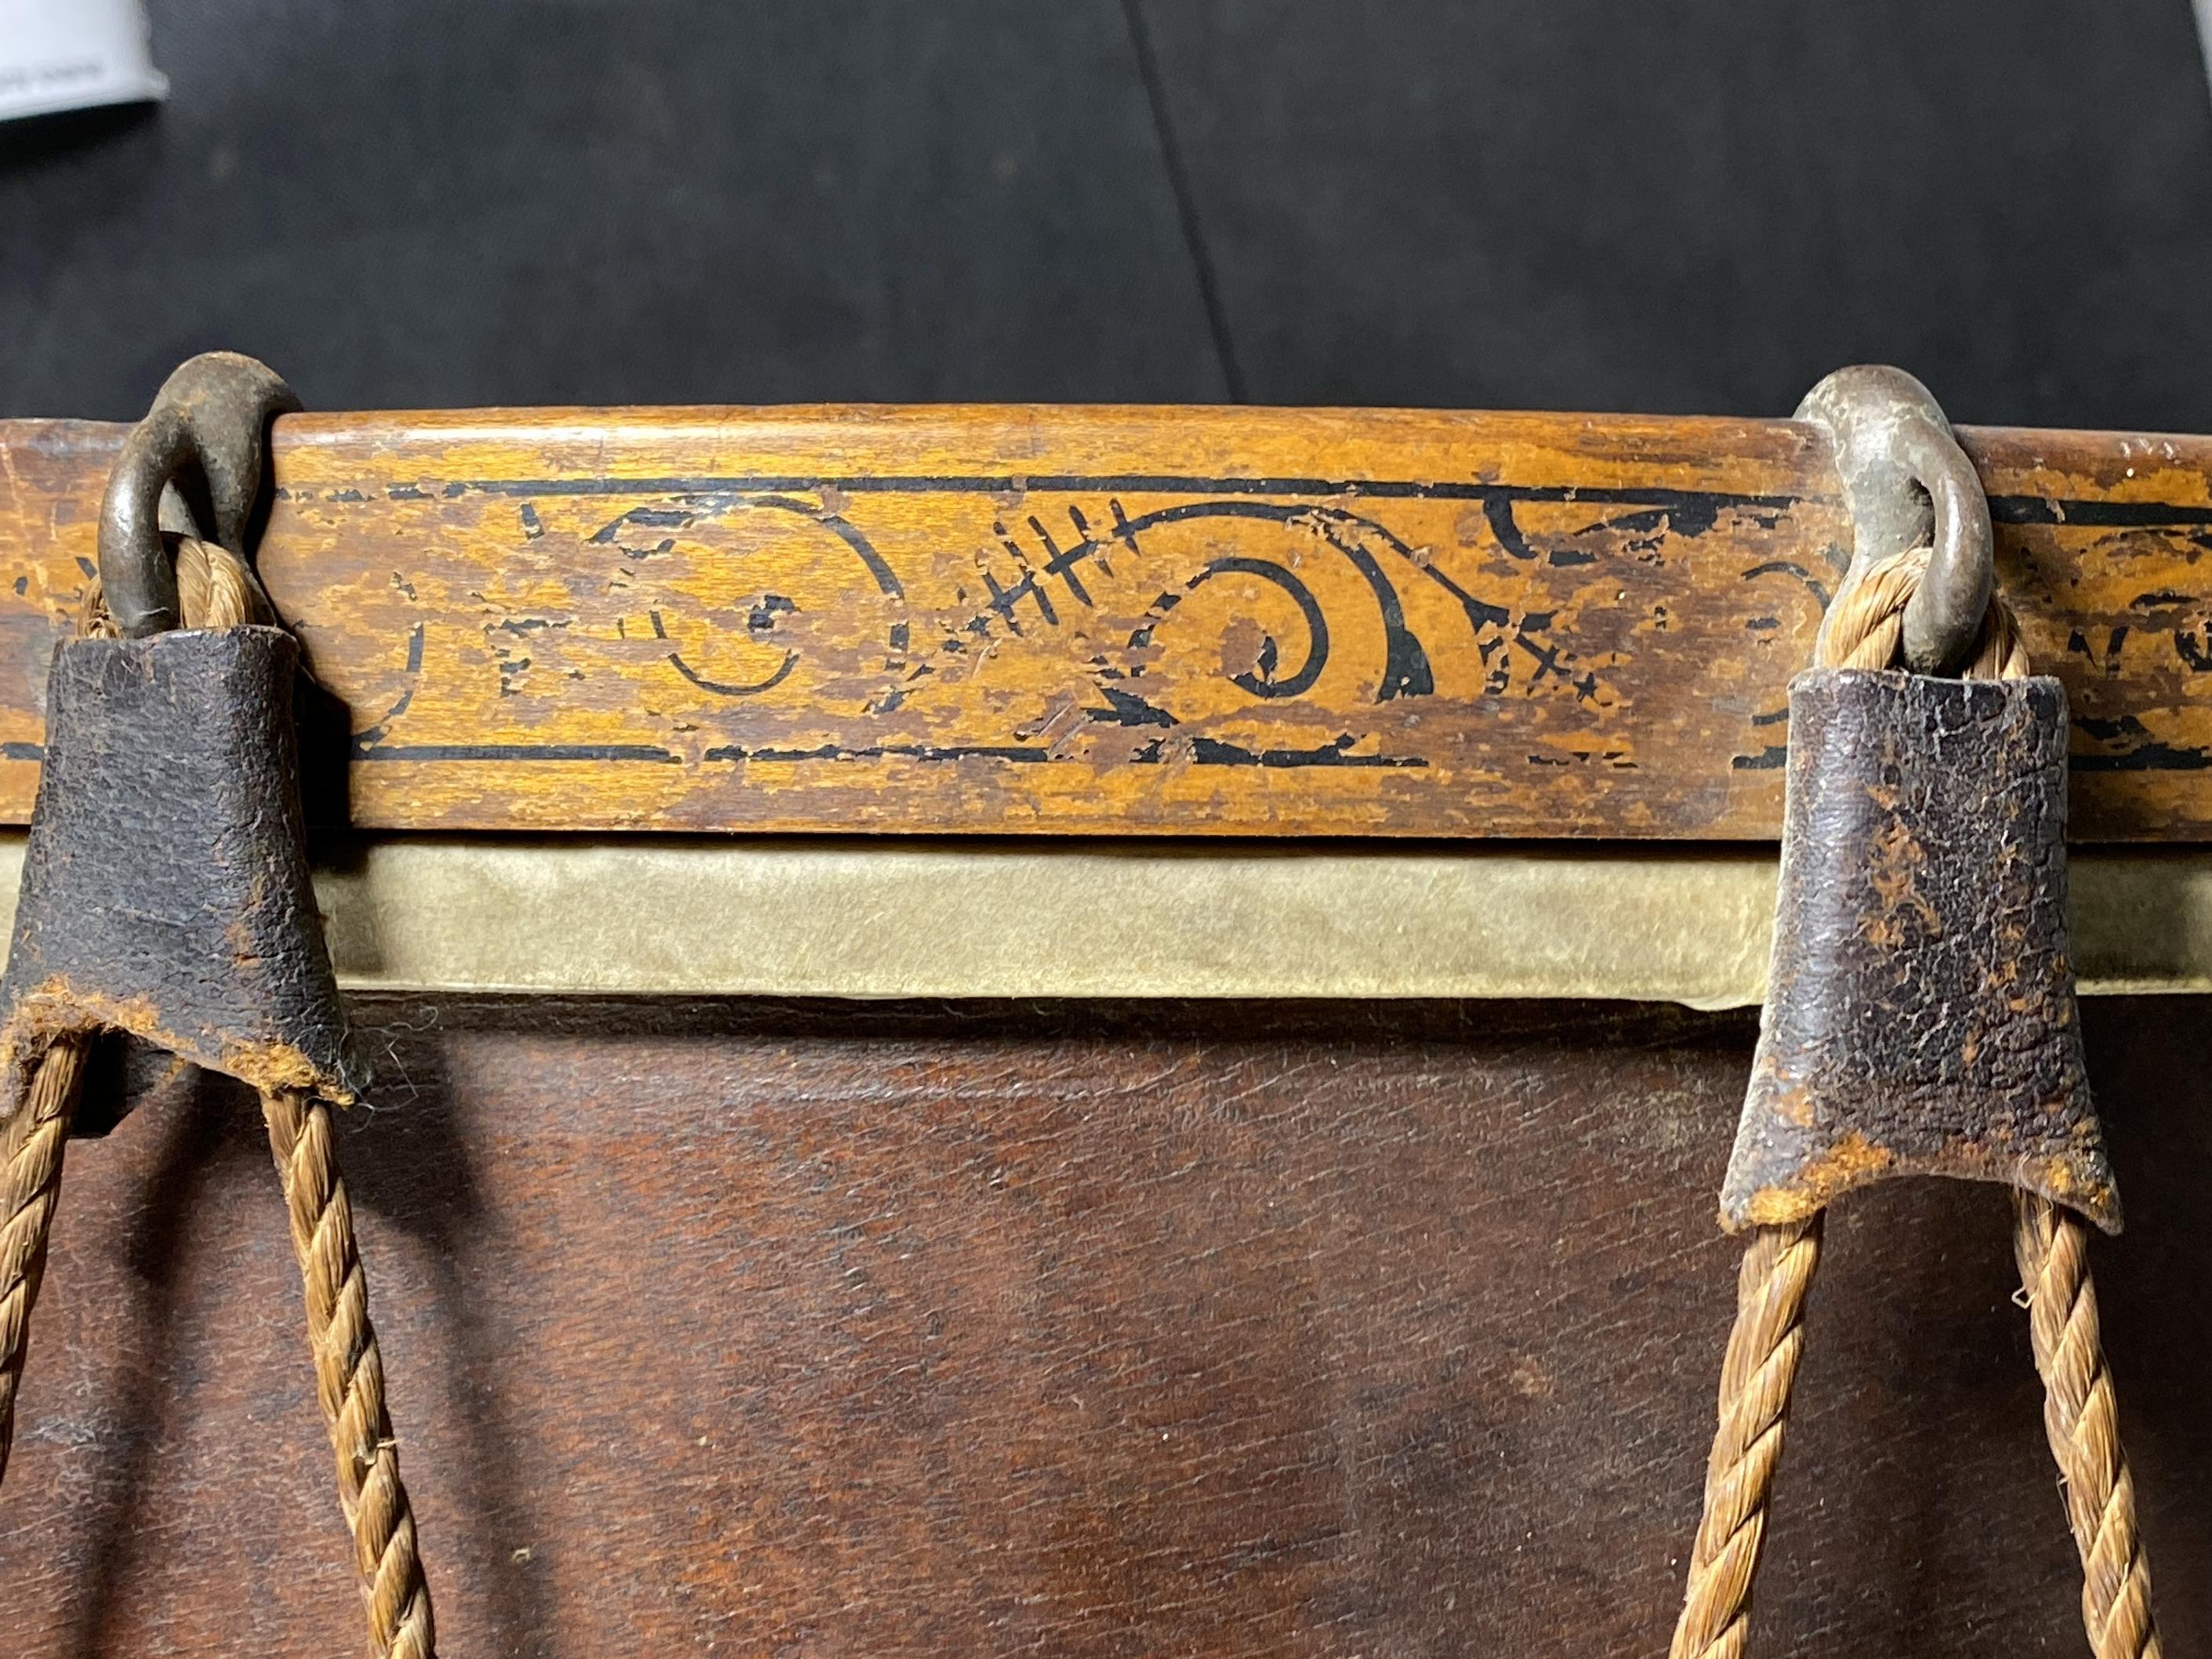 Rare Large 19th c. Marching Band Drum